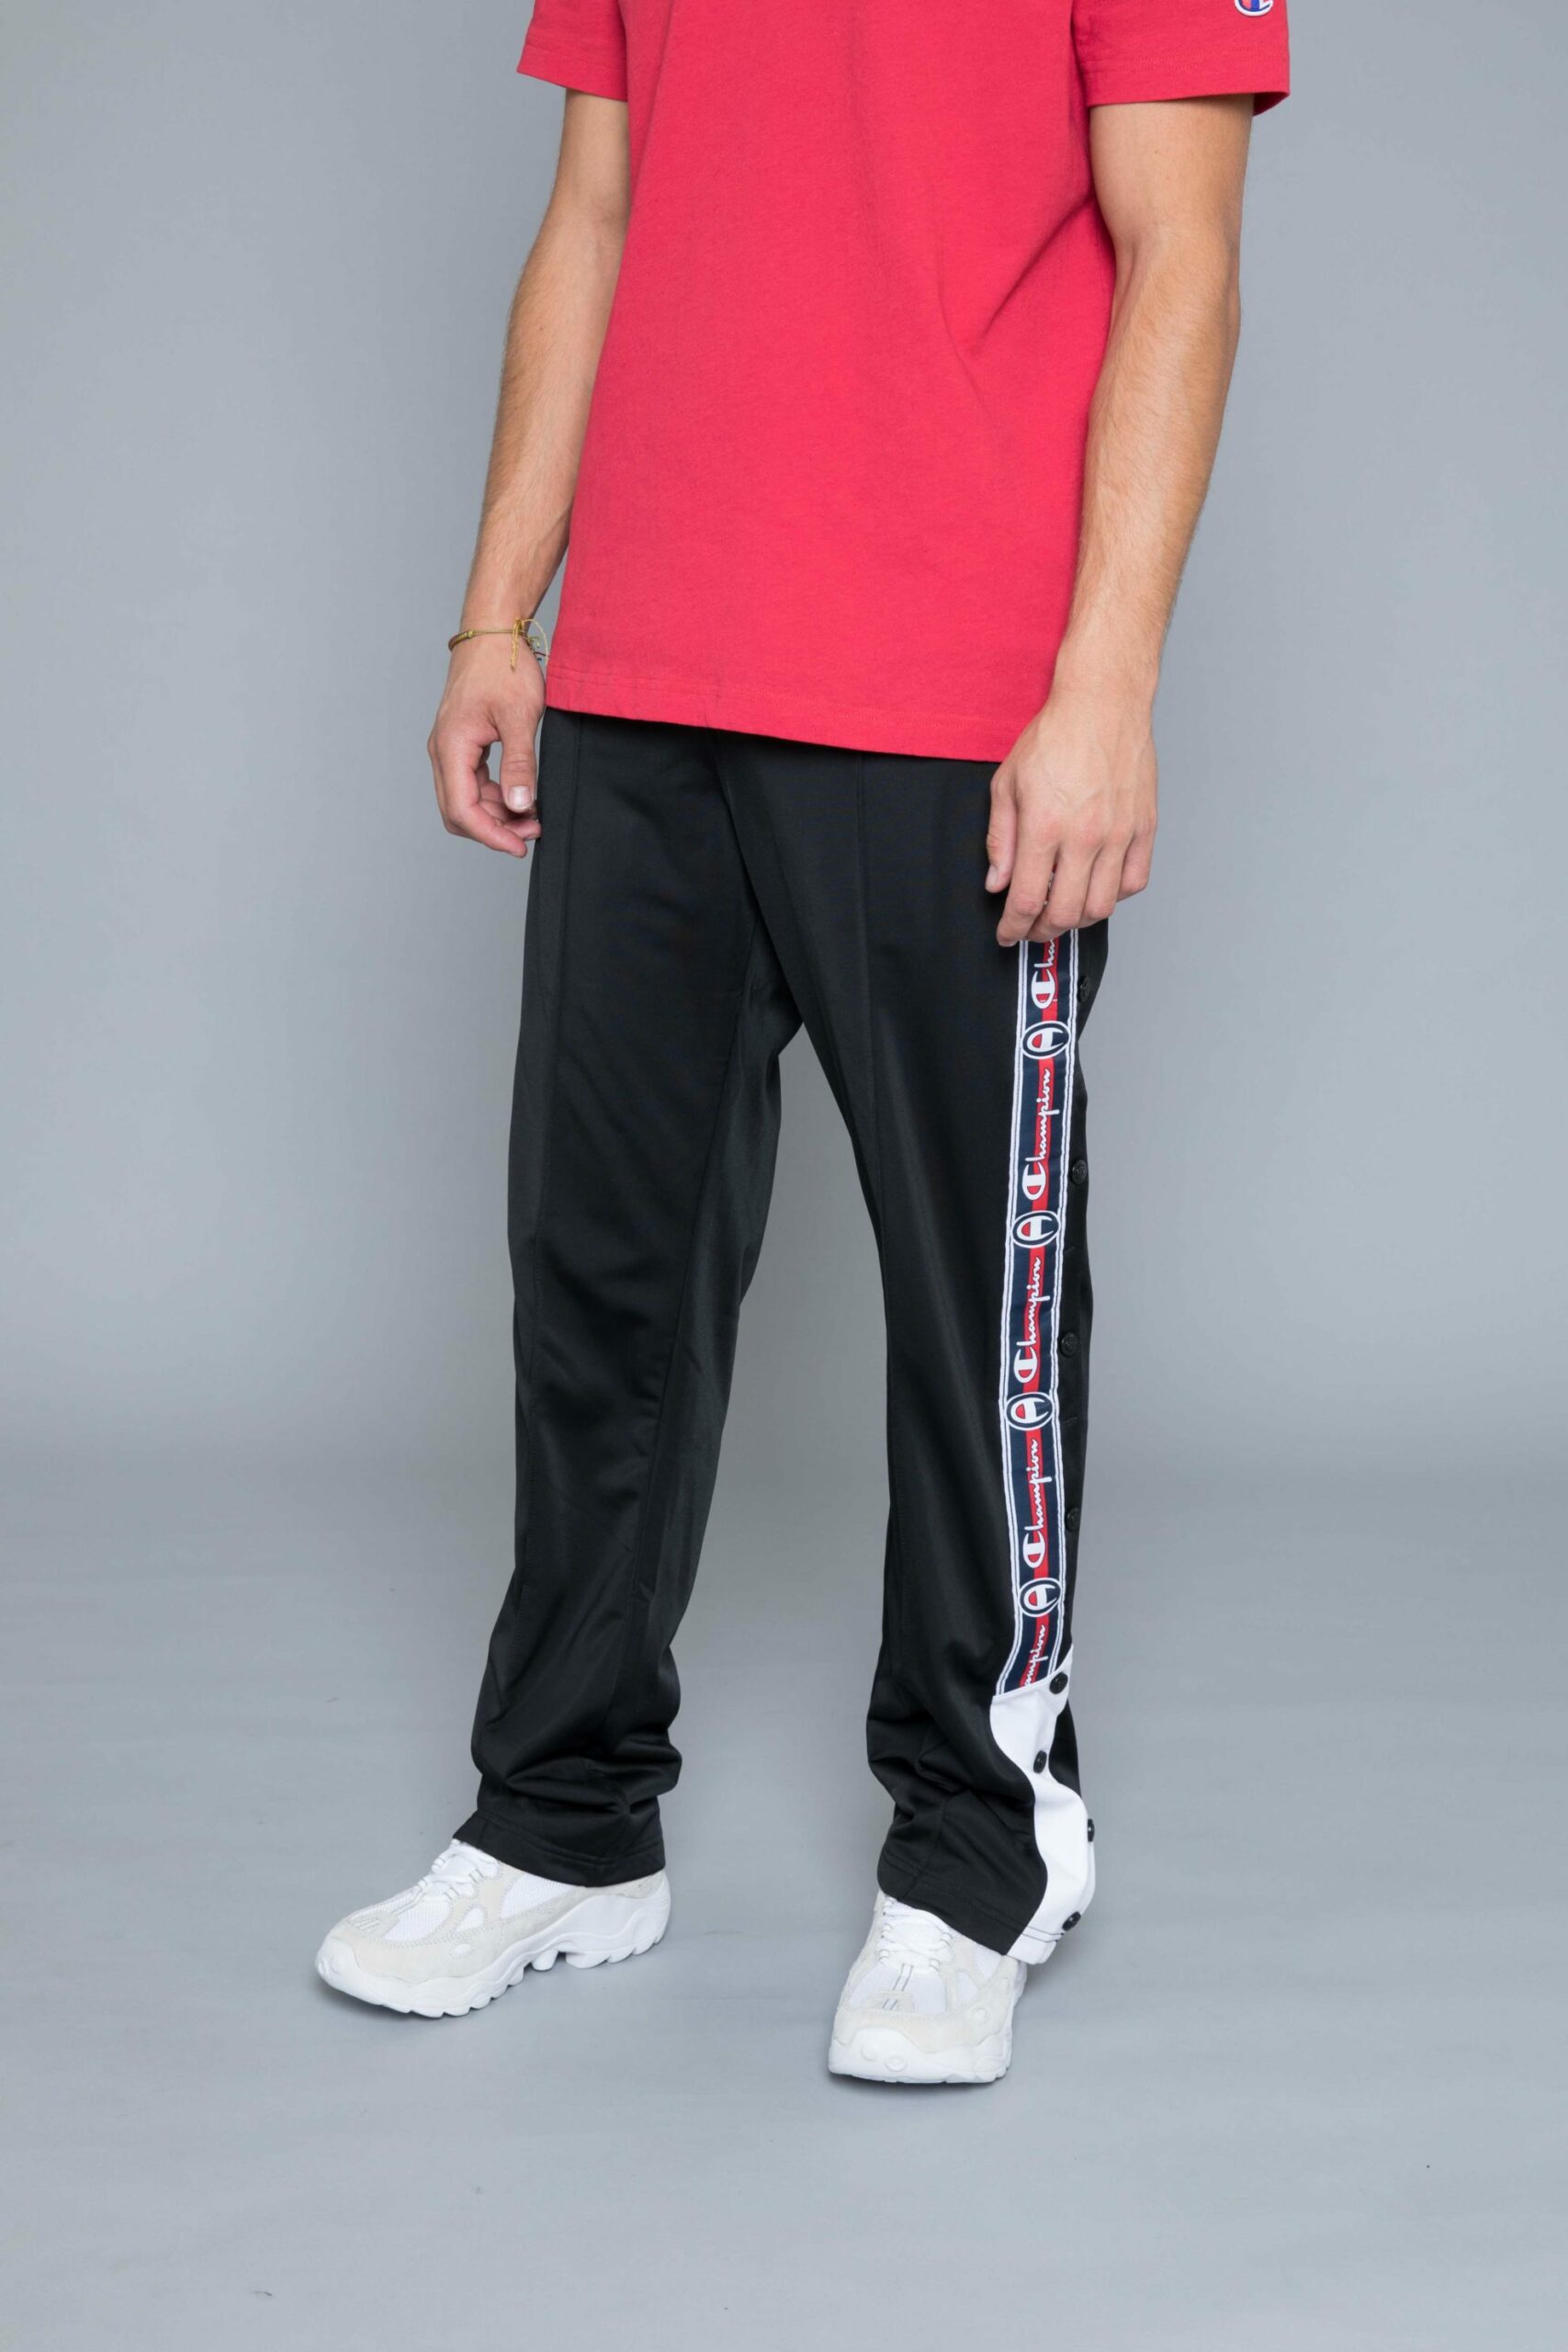 Buy Men Track Pants So Stylish and Cozy- You Can Wear Them All Day